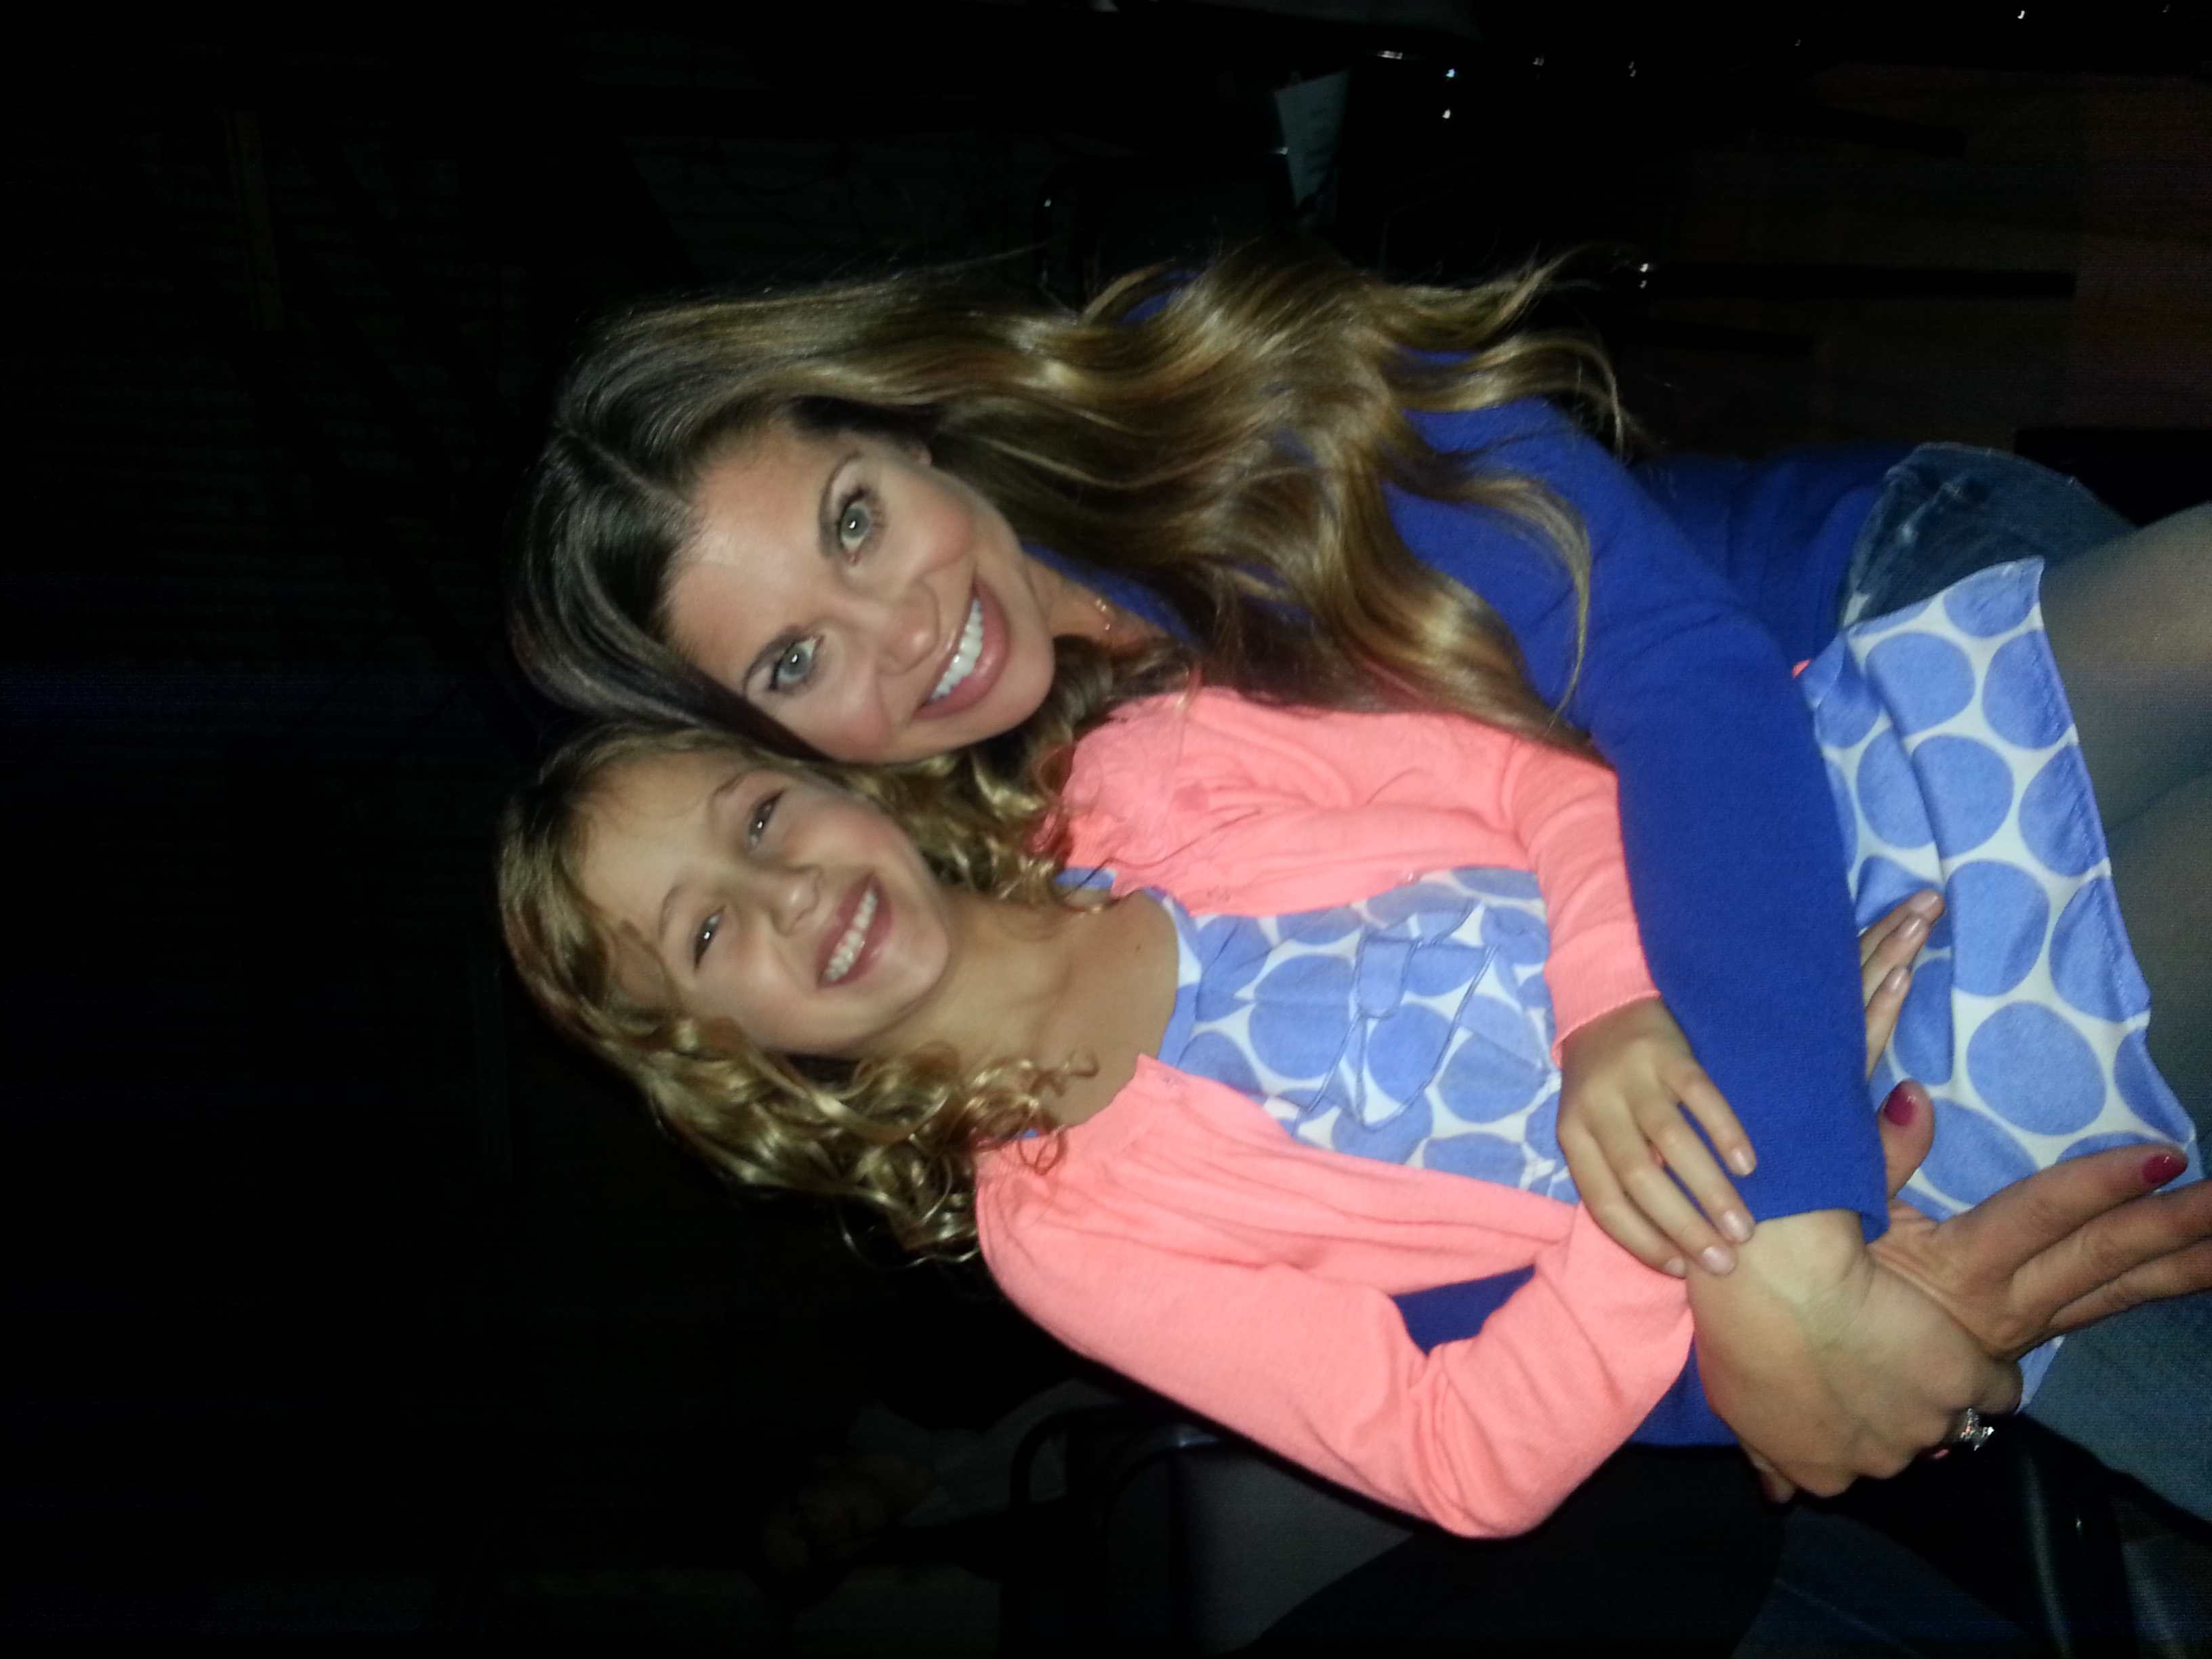 Ava and Danielle Fishel on the set of Girl Meets World